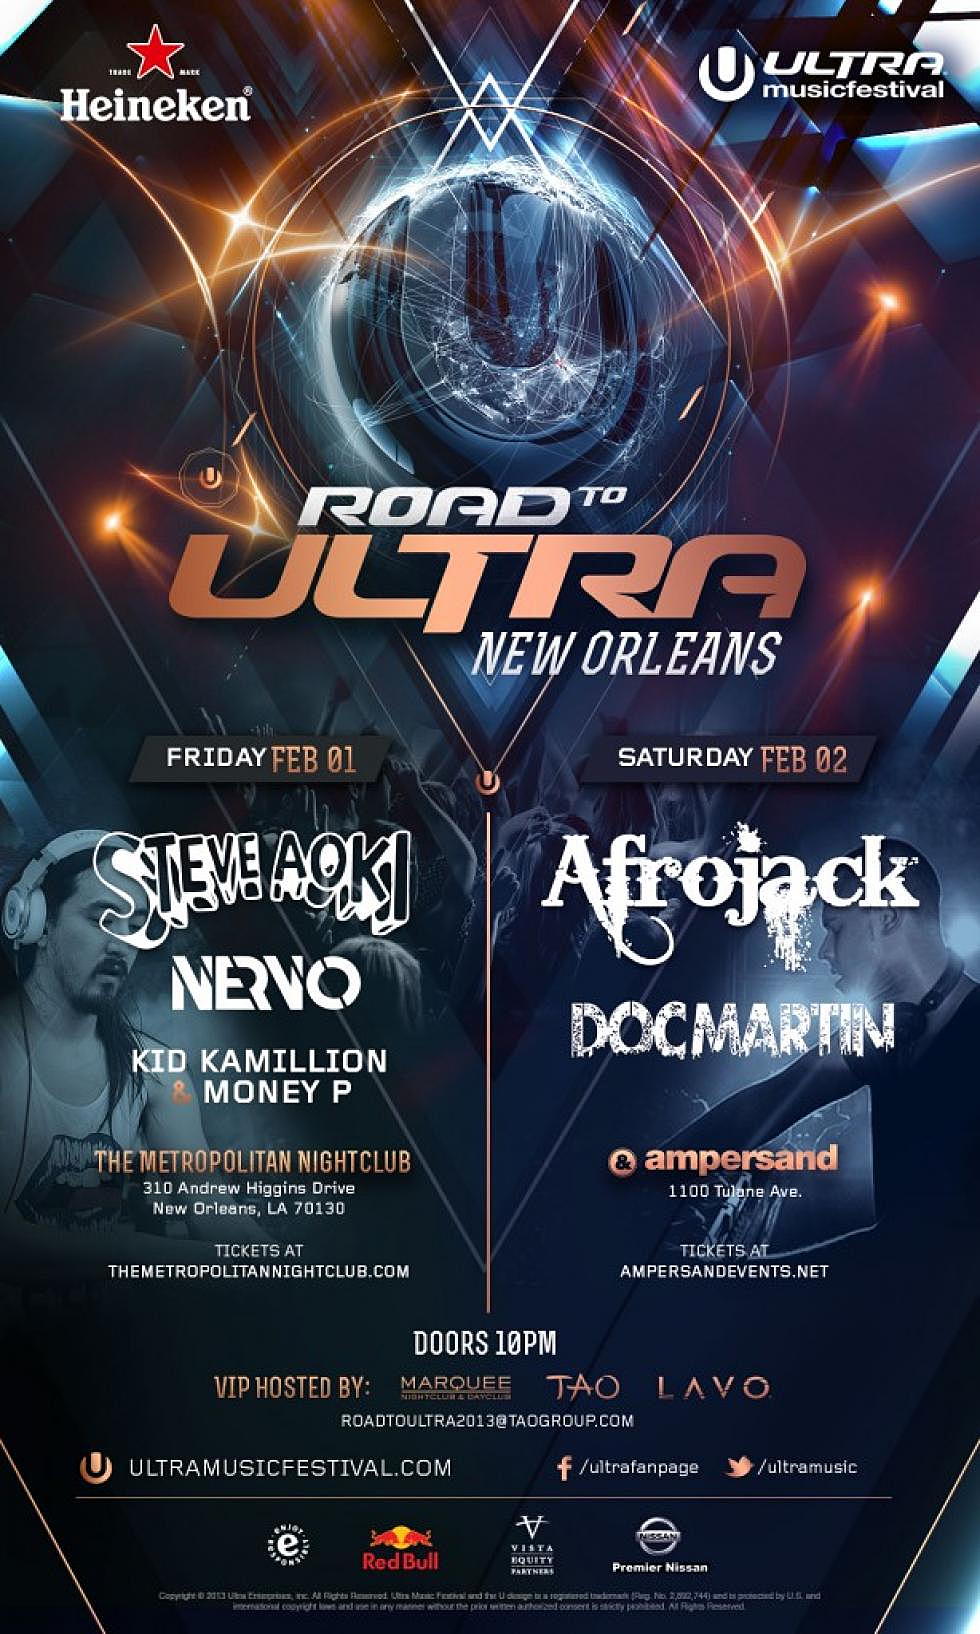 elektro presents: Win tickets to Afrojack &#038; Steve Aoki shows in New Orleans for Super Bowl Weekend